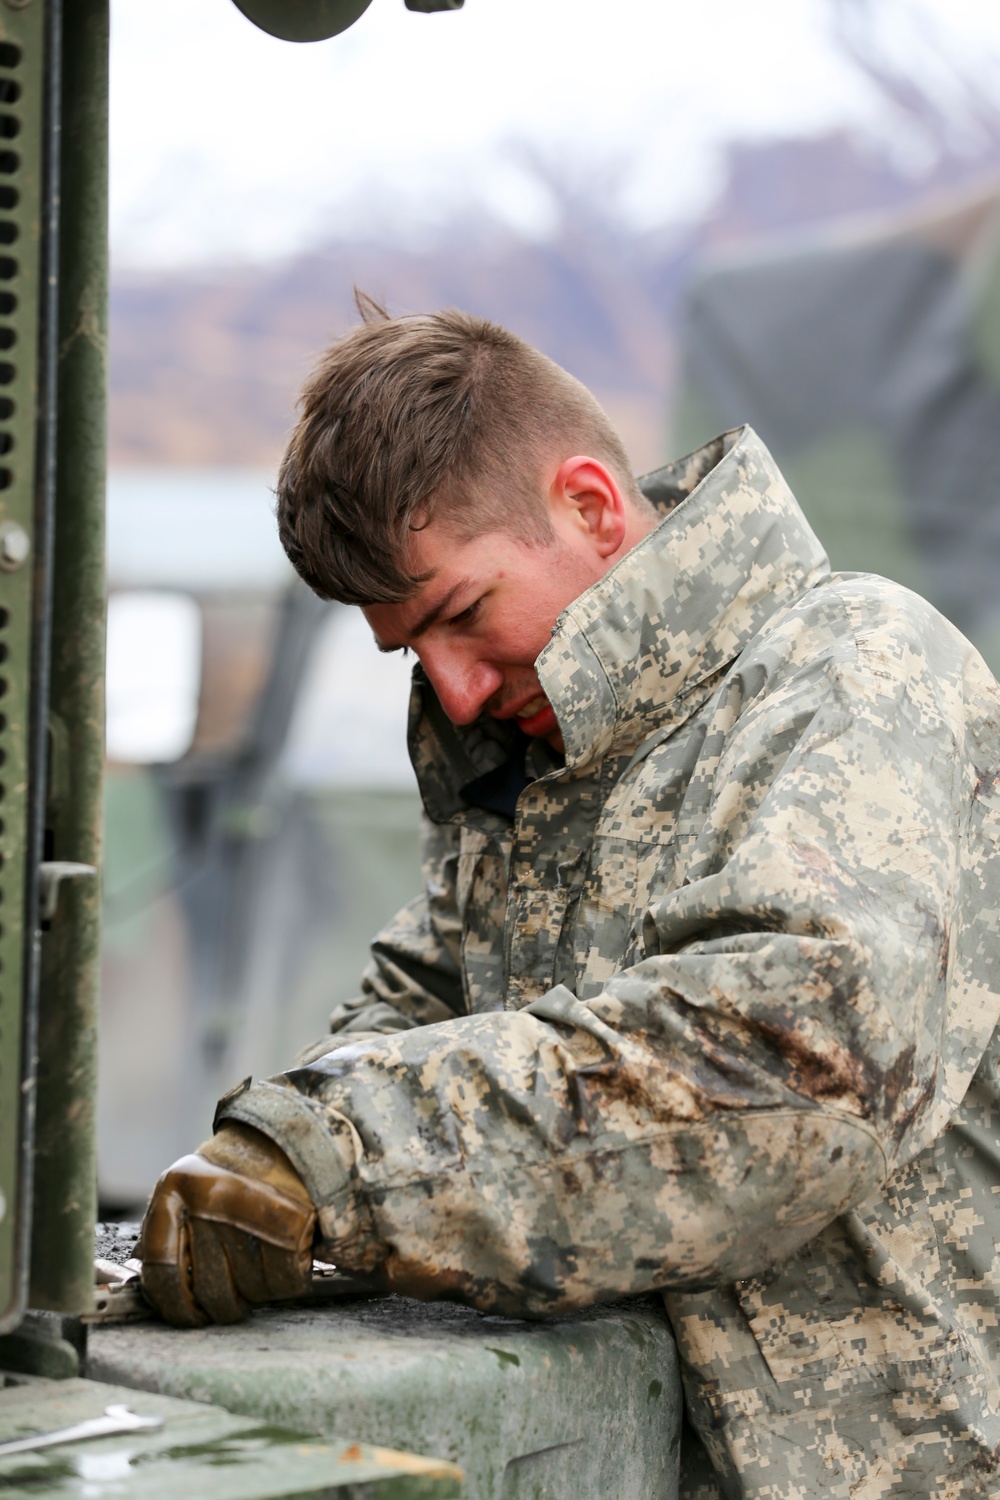 Service members unite to provide assistance to isolated village in Alaska